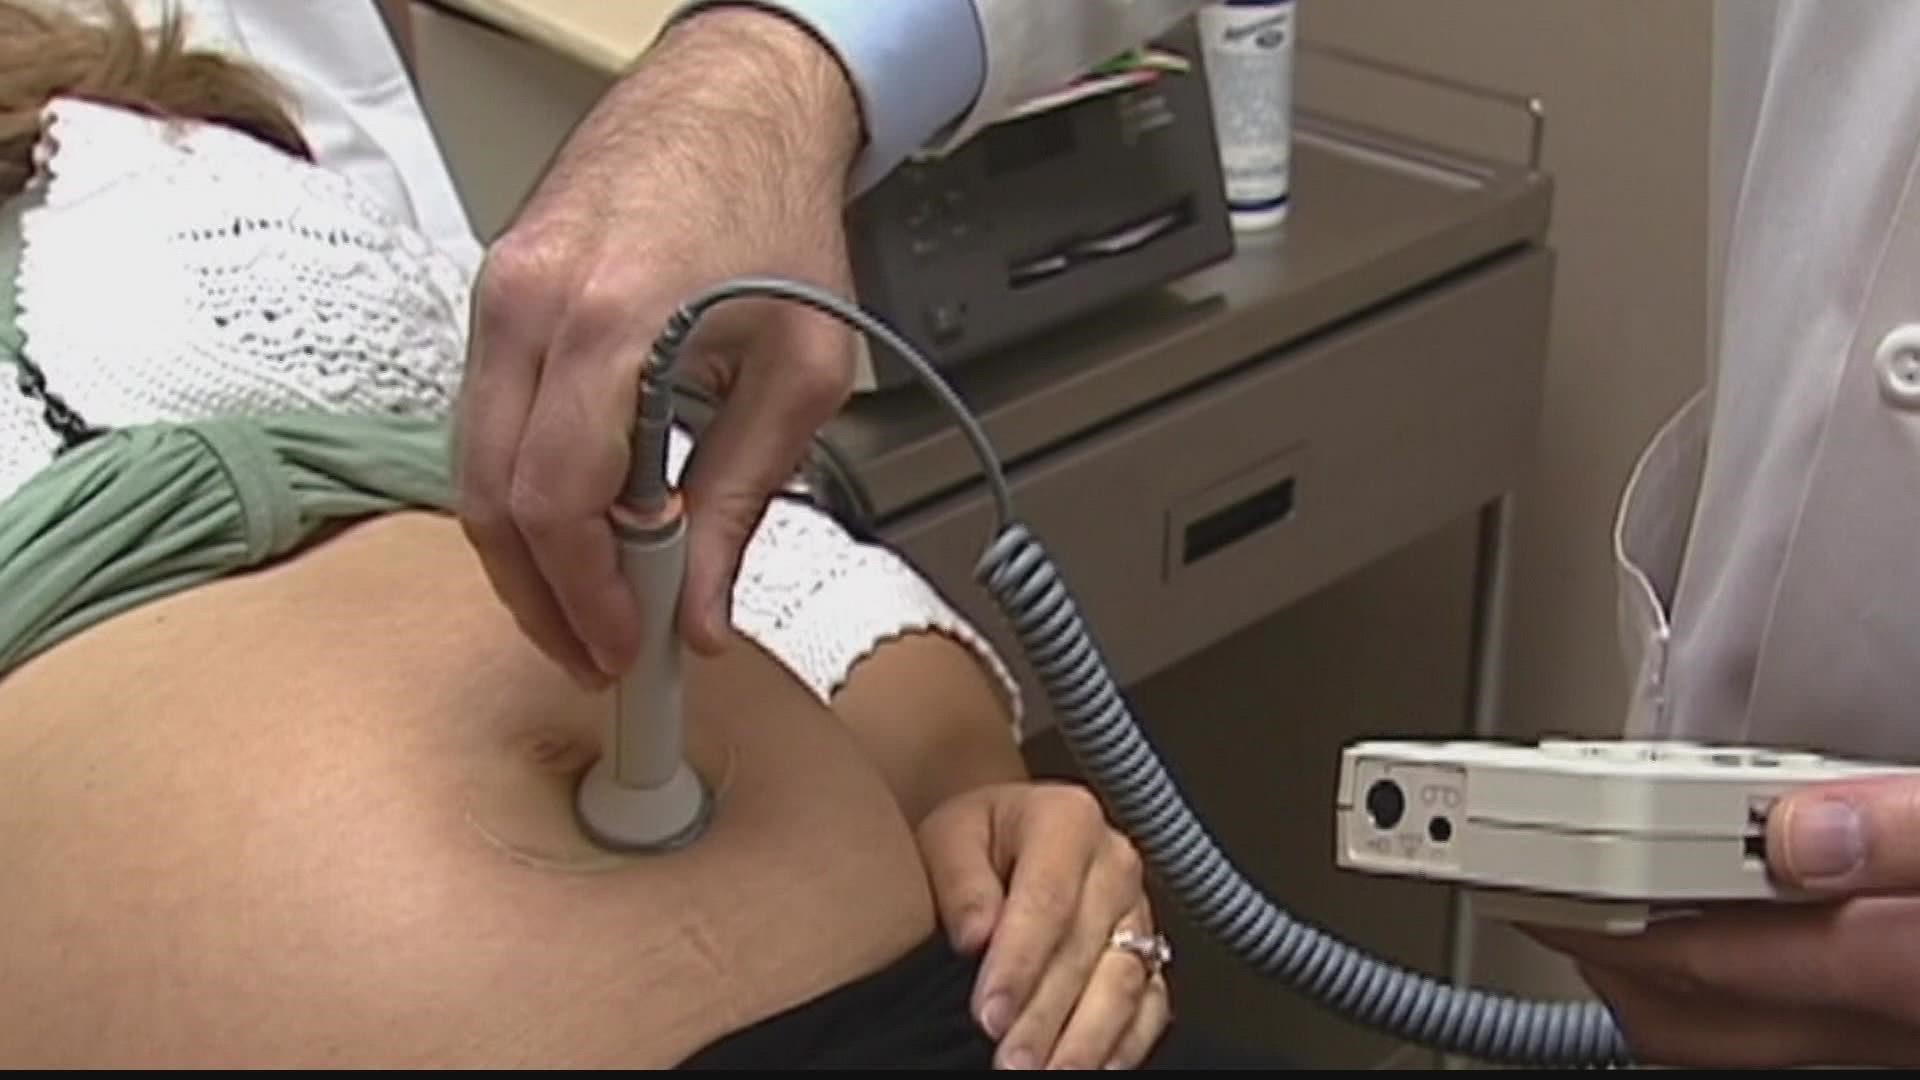 There's new information about maternal mortality nationwide, according to a CDC report.